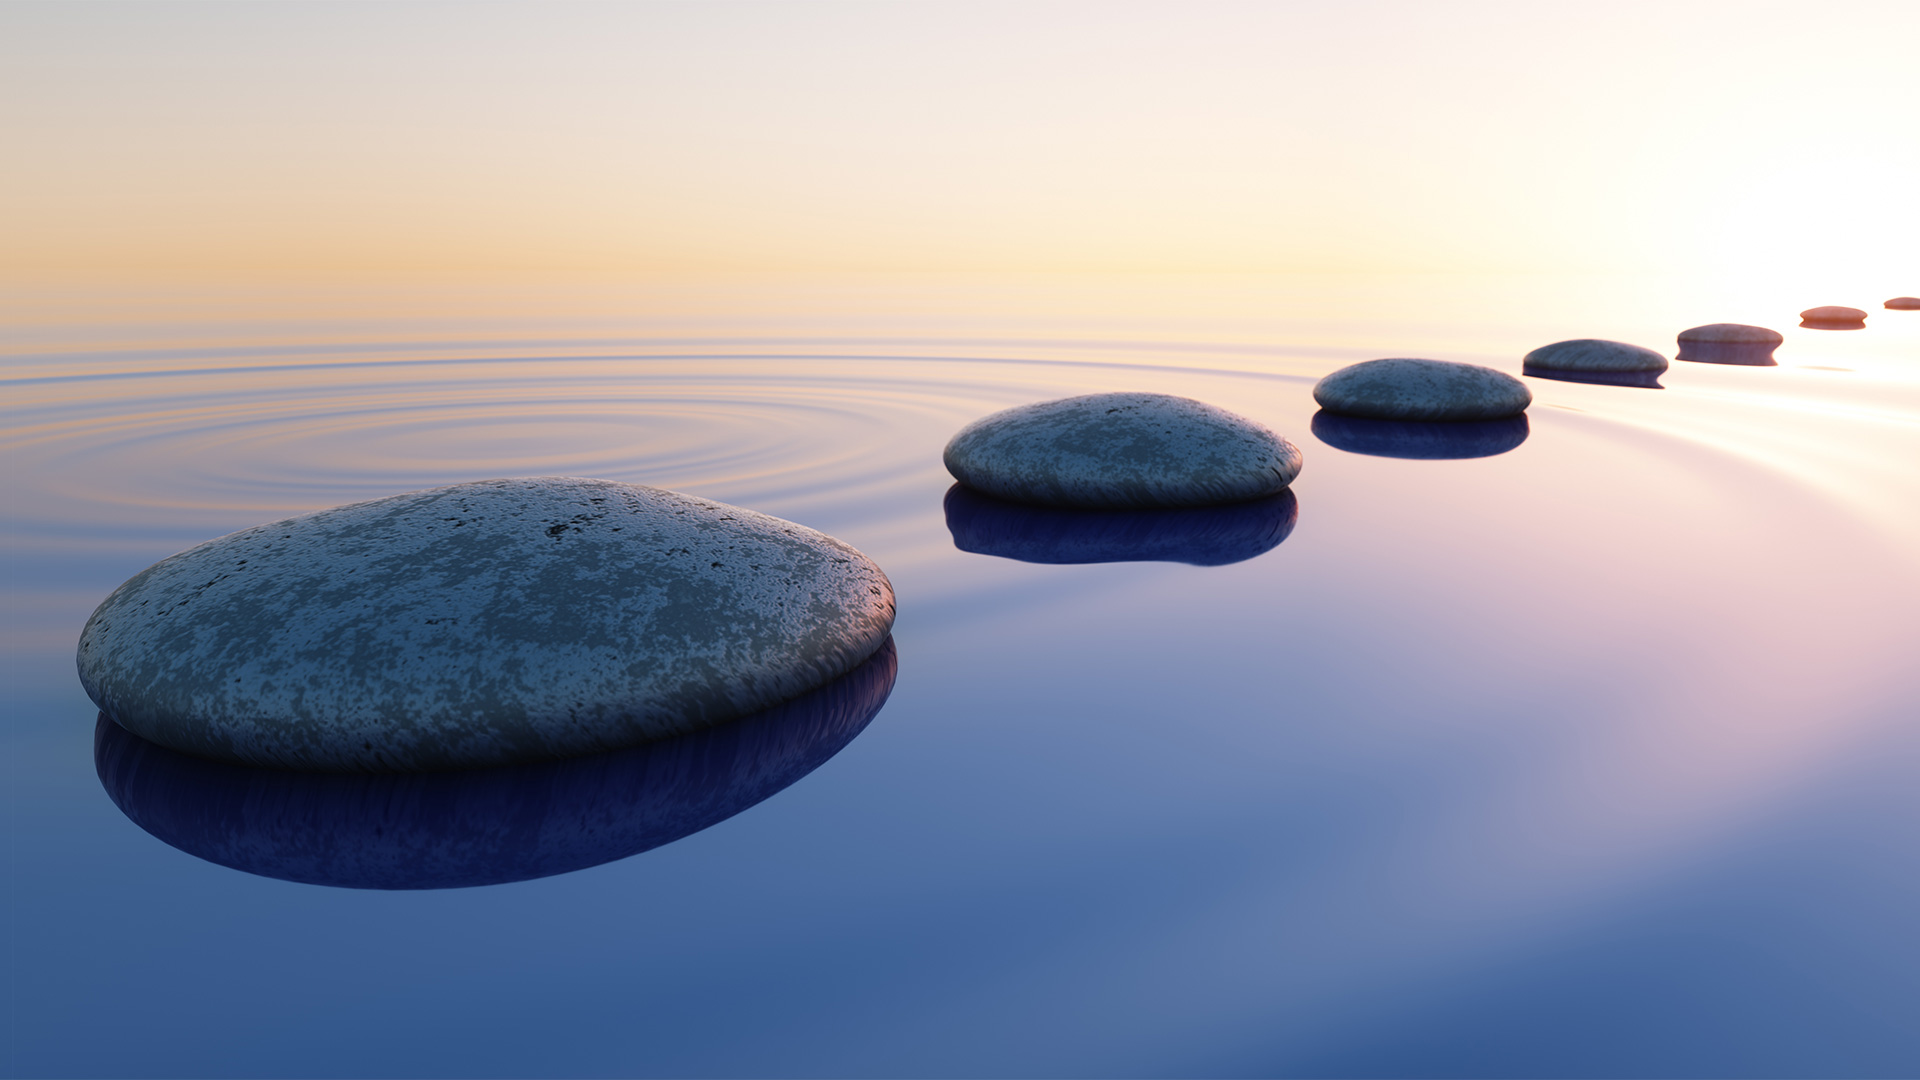 Row of stones on still water, relaxing concept